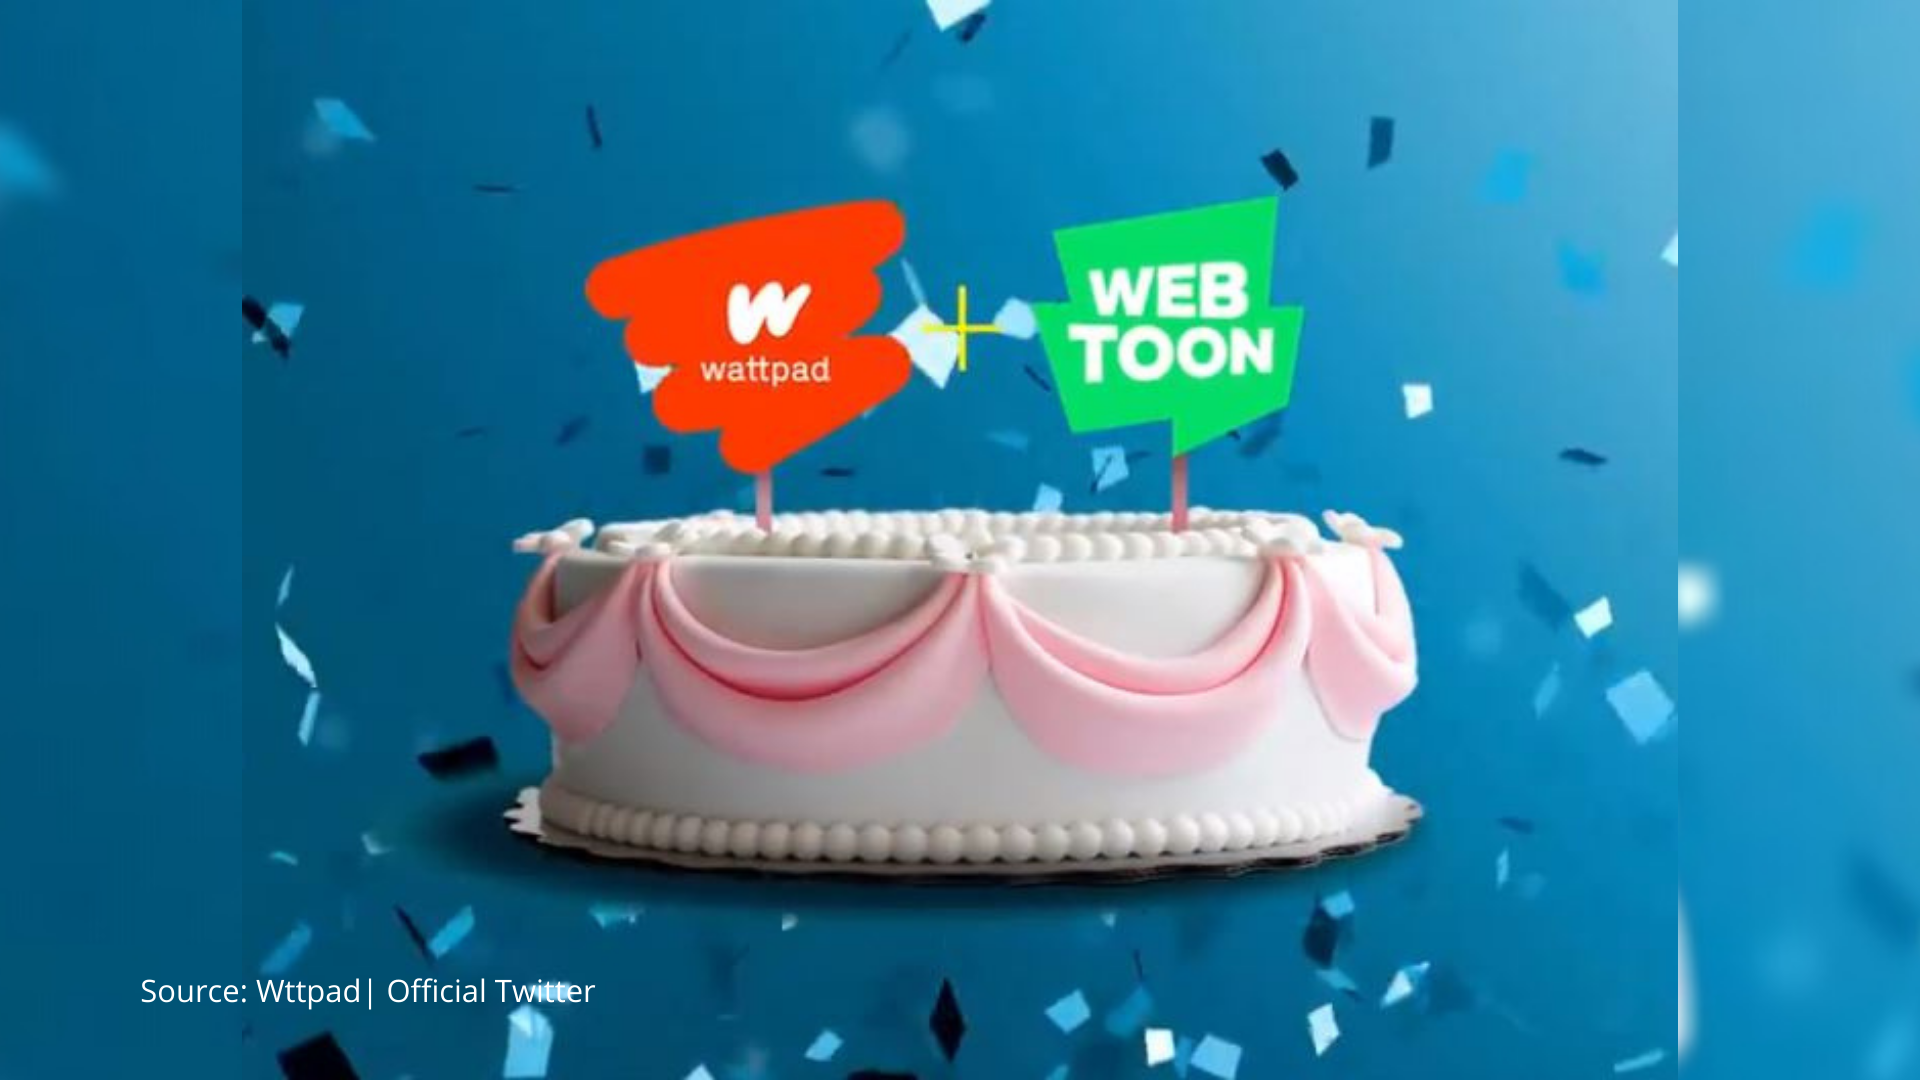 Storytelling Platform Wattpad to be Acquired by Naver, the Home of WEBTOON